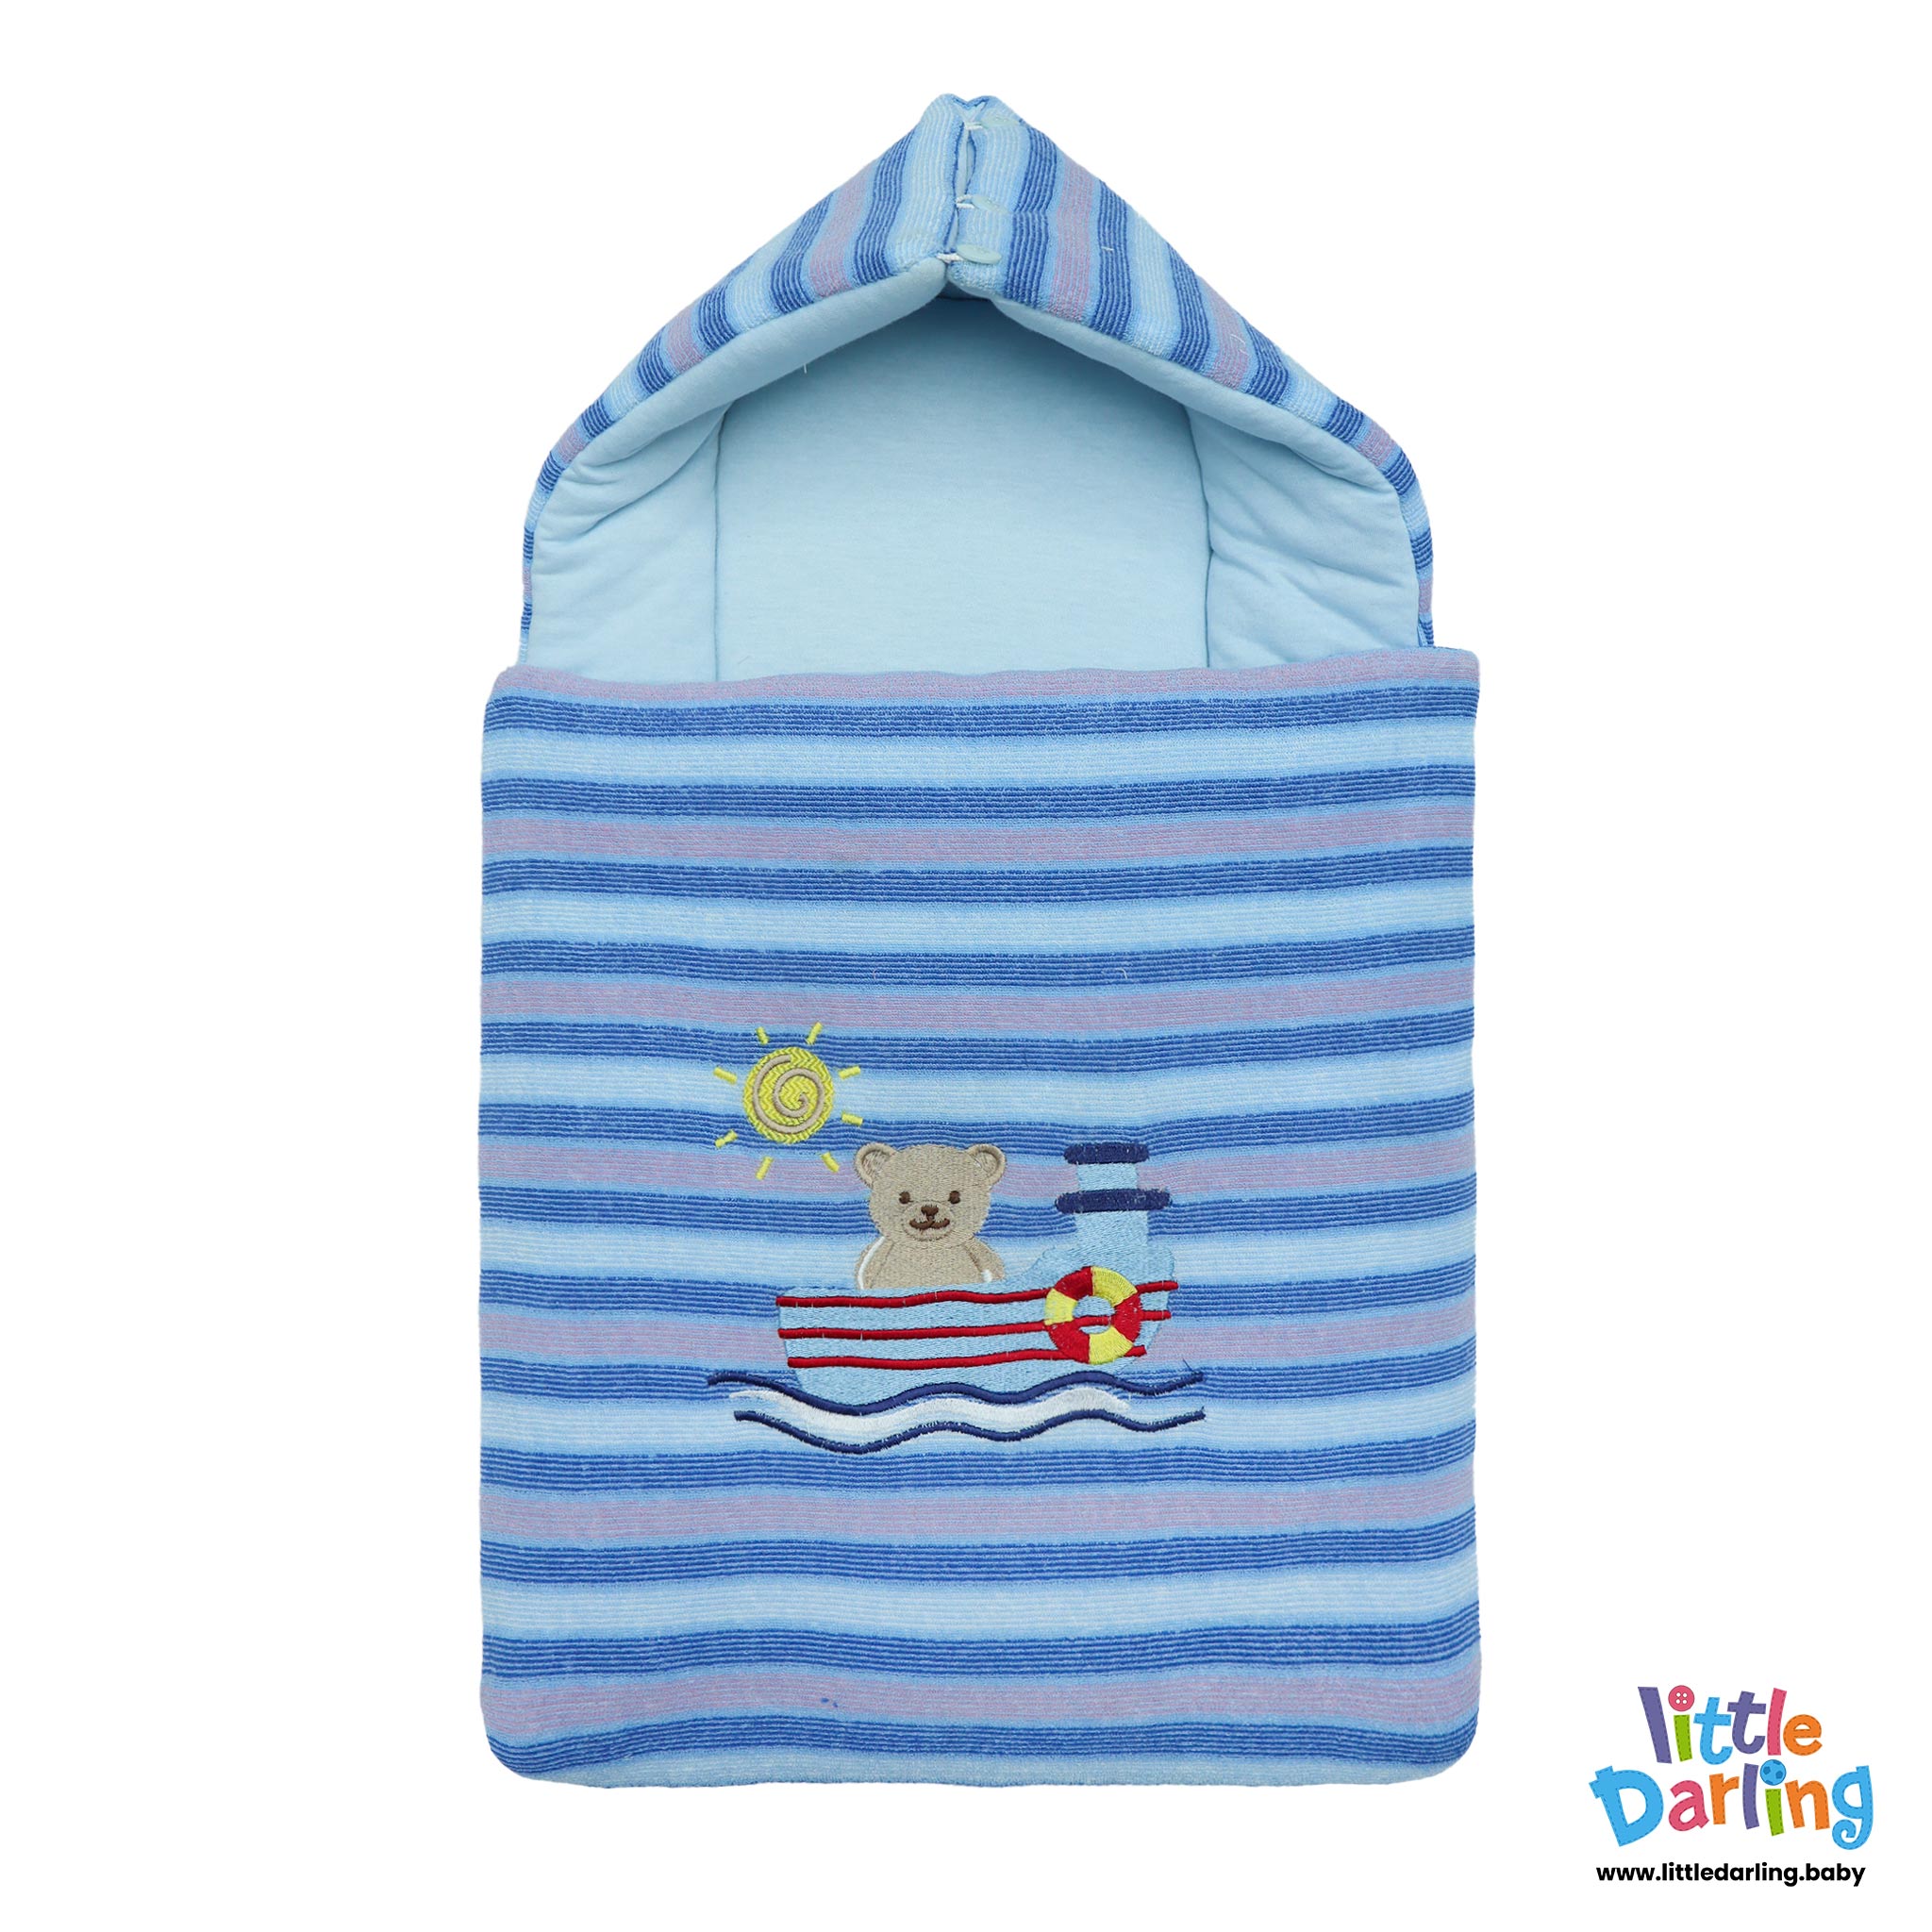 Baby Carry nest Hooded With Pillow Bear Embroidery Blue Stripes by Little Darling